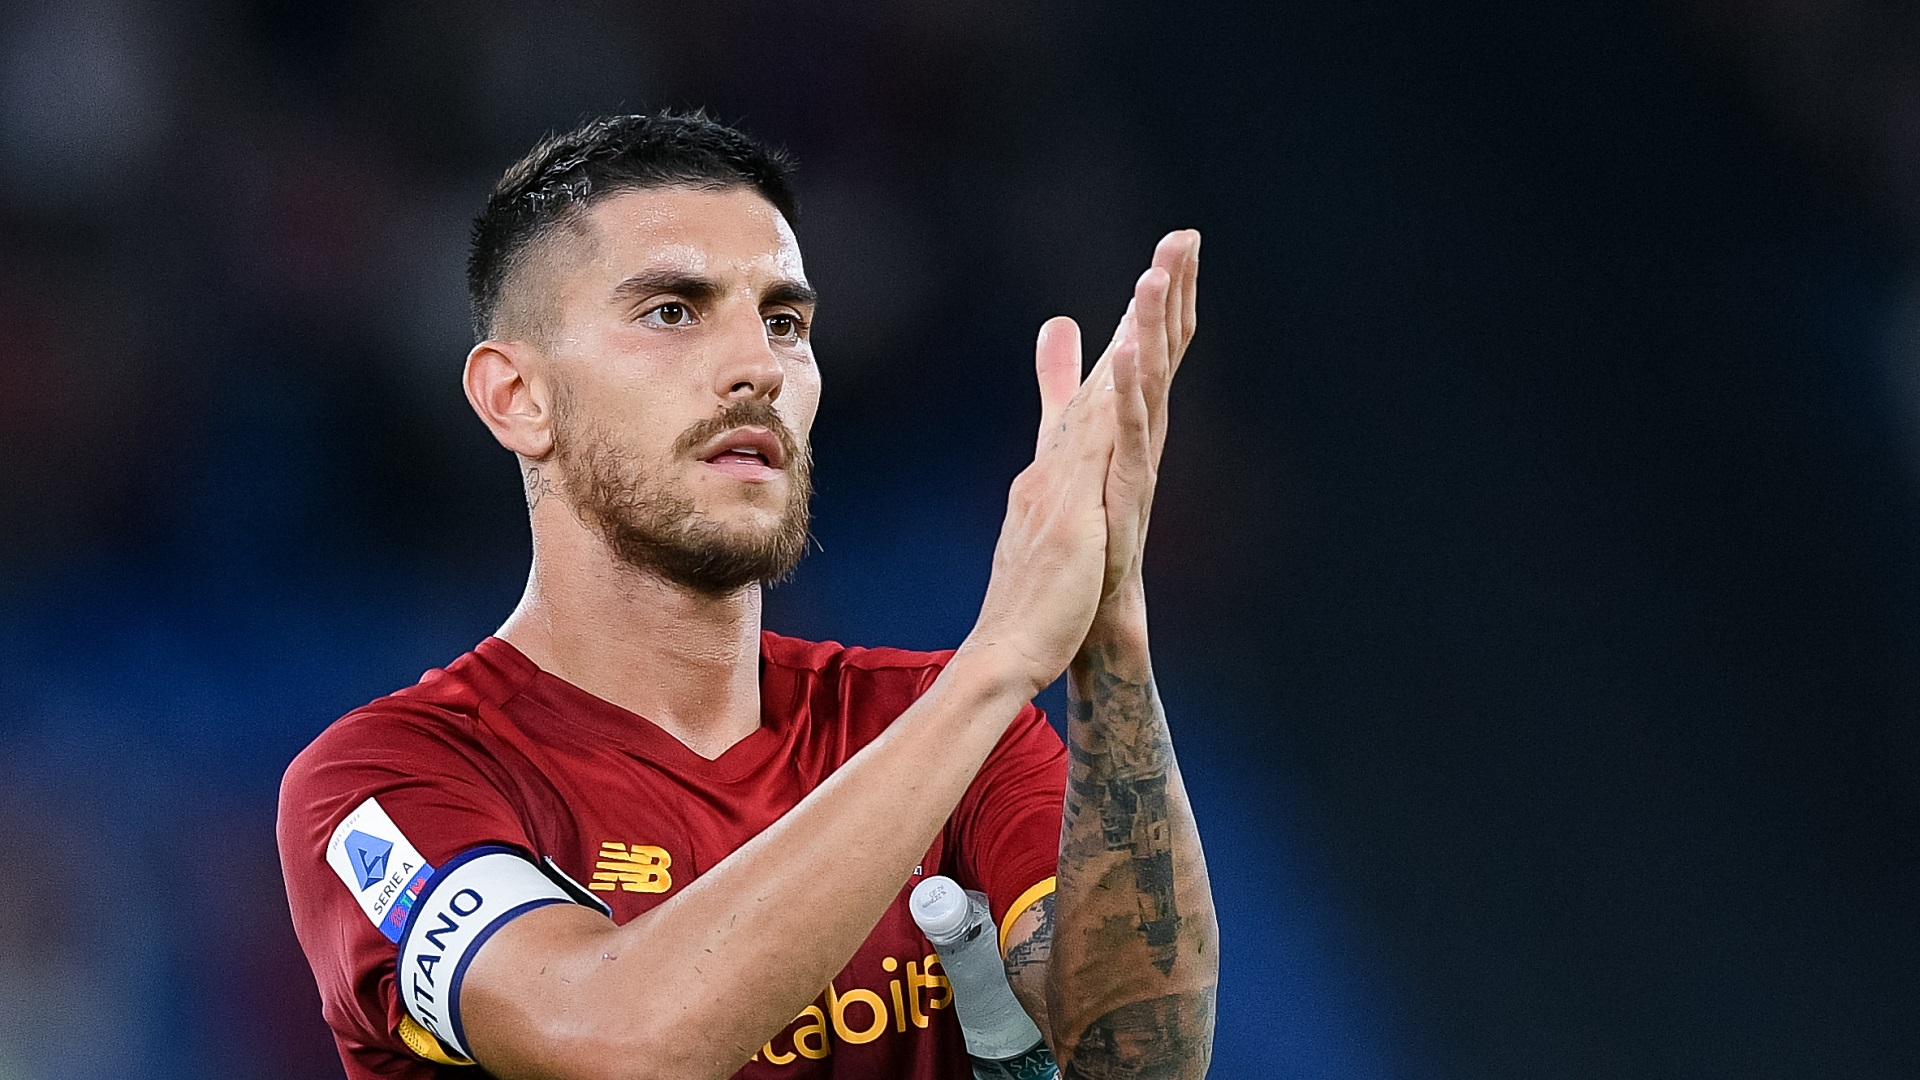 Lorenzo Pellegrini has been rejuvenated following the arrival of Daniele De Rossi on the Roma bench, but the transfer market is a threat.